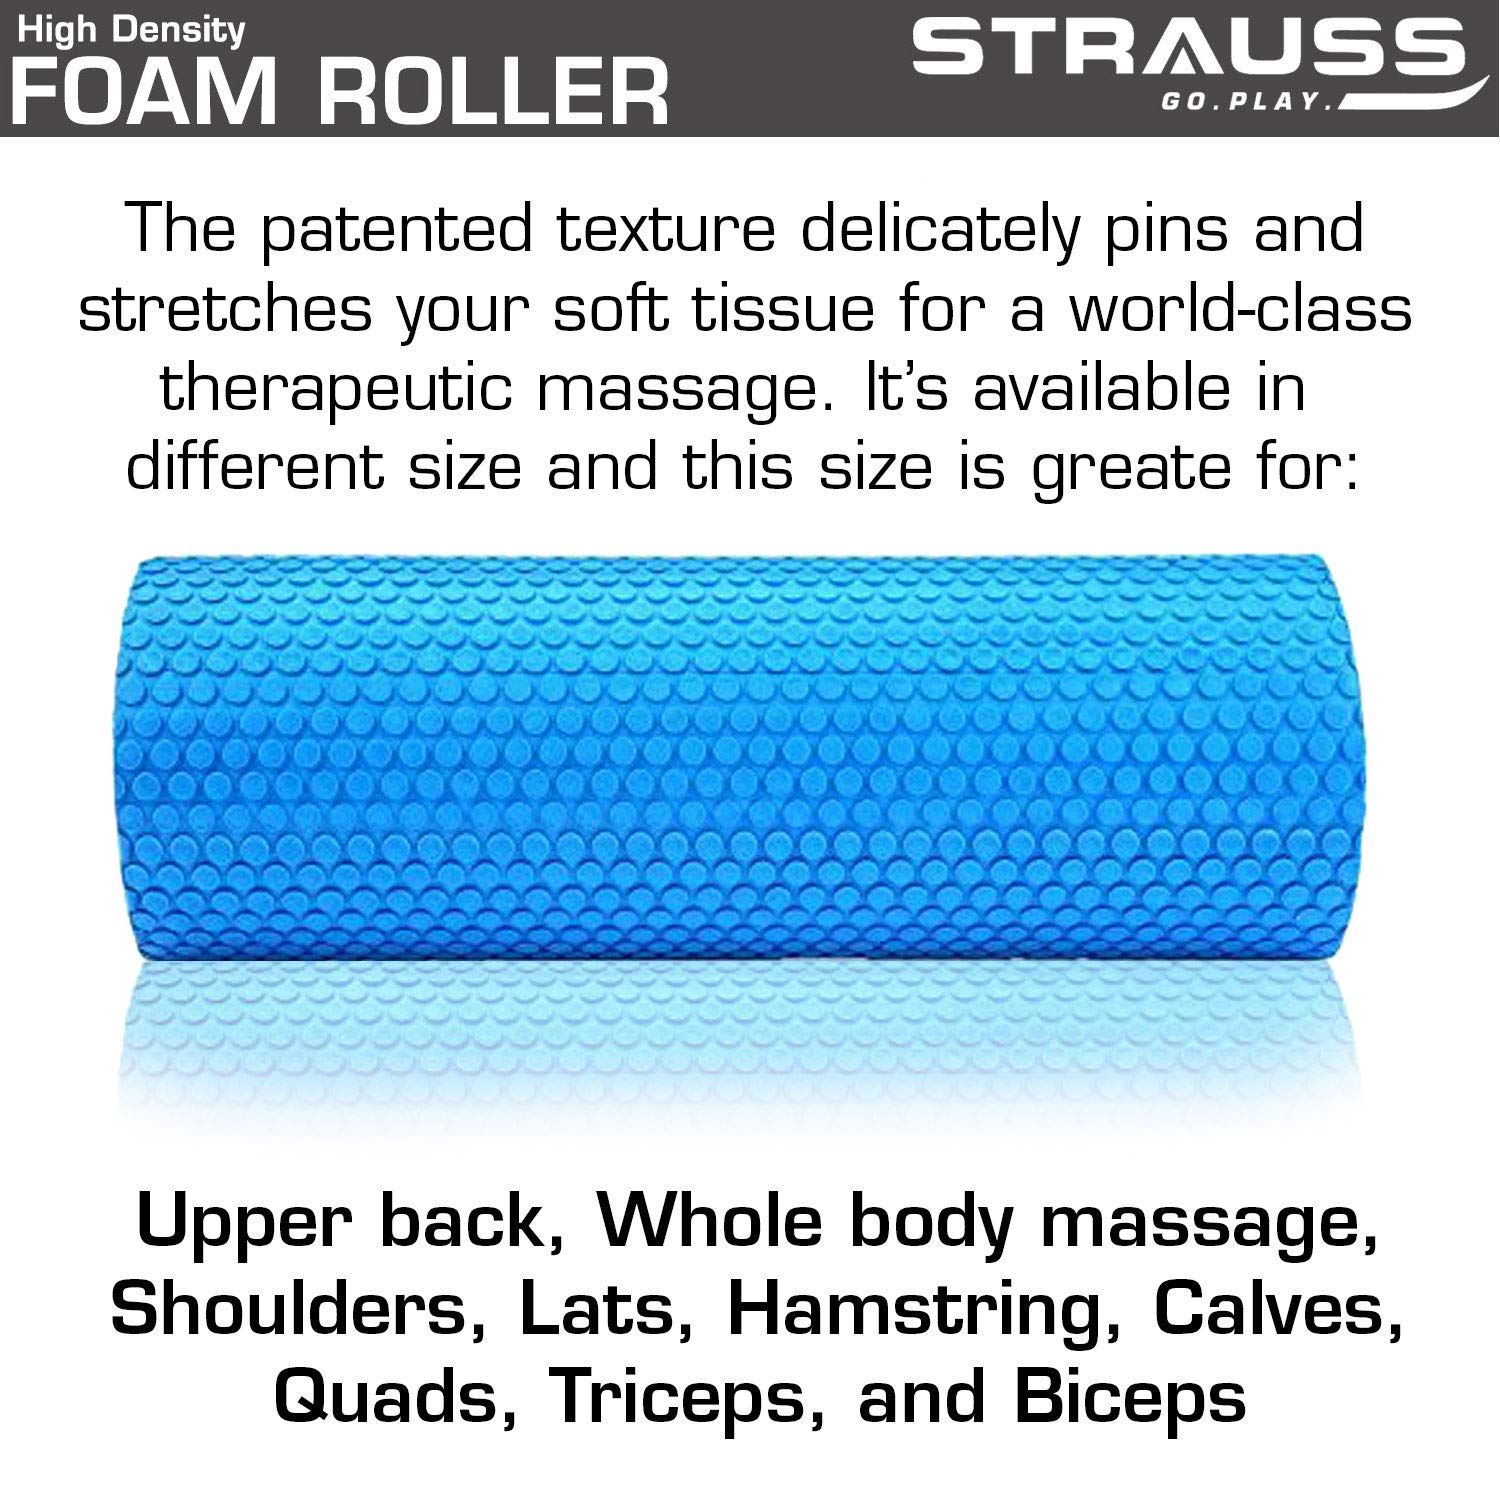 Strauss Yoga Foam Roller, 30cm (Blue) and Toning Tube (Blue)